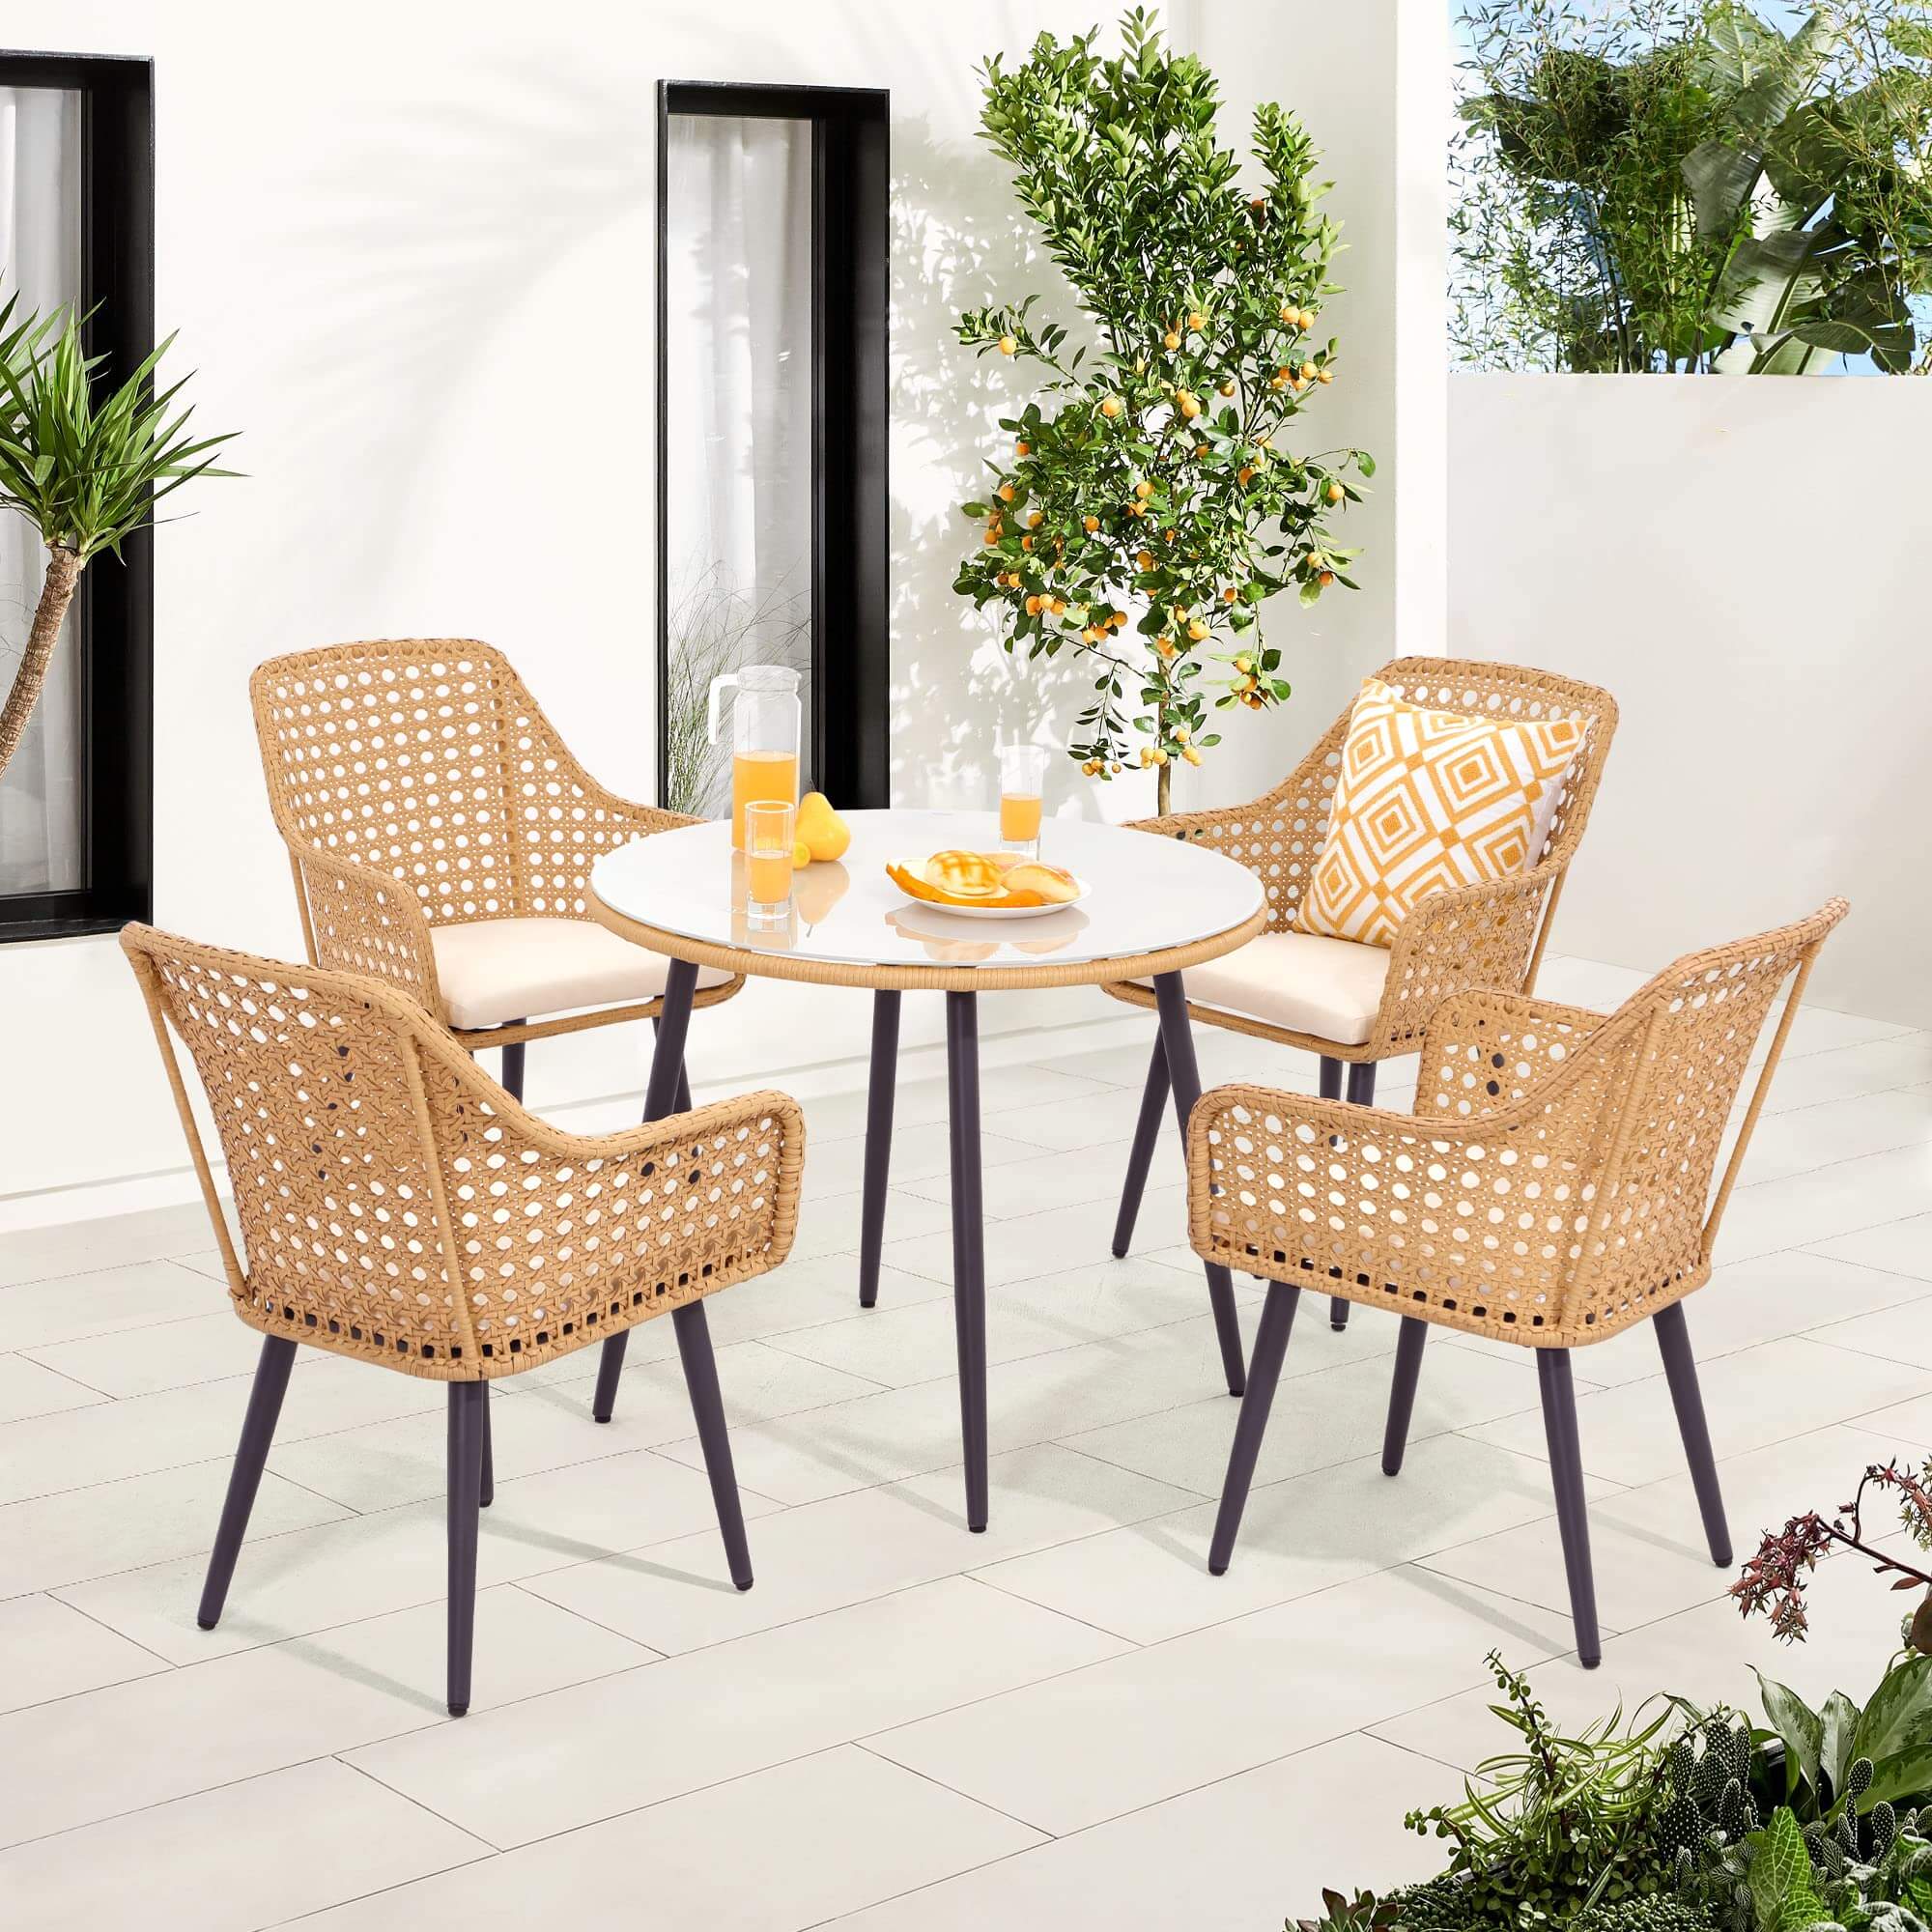  5 Pieces Outdoor Dining Set, All-Weather Wicker Patio Dining Table and Chairs